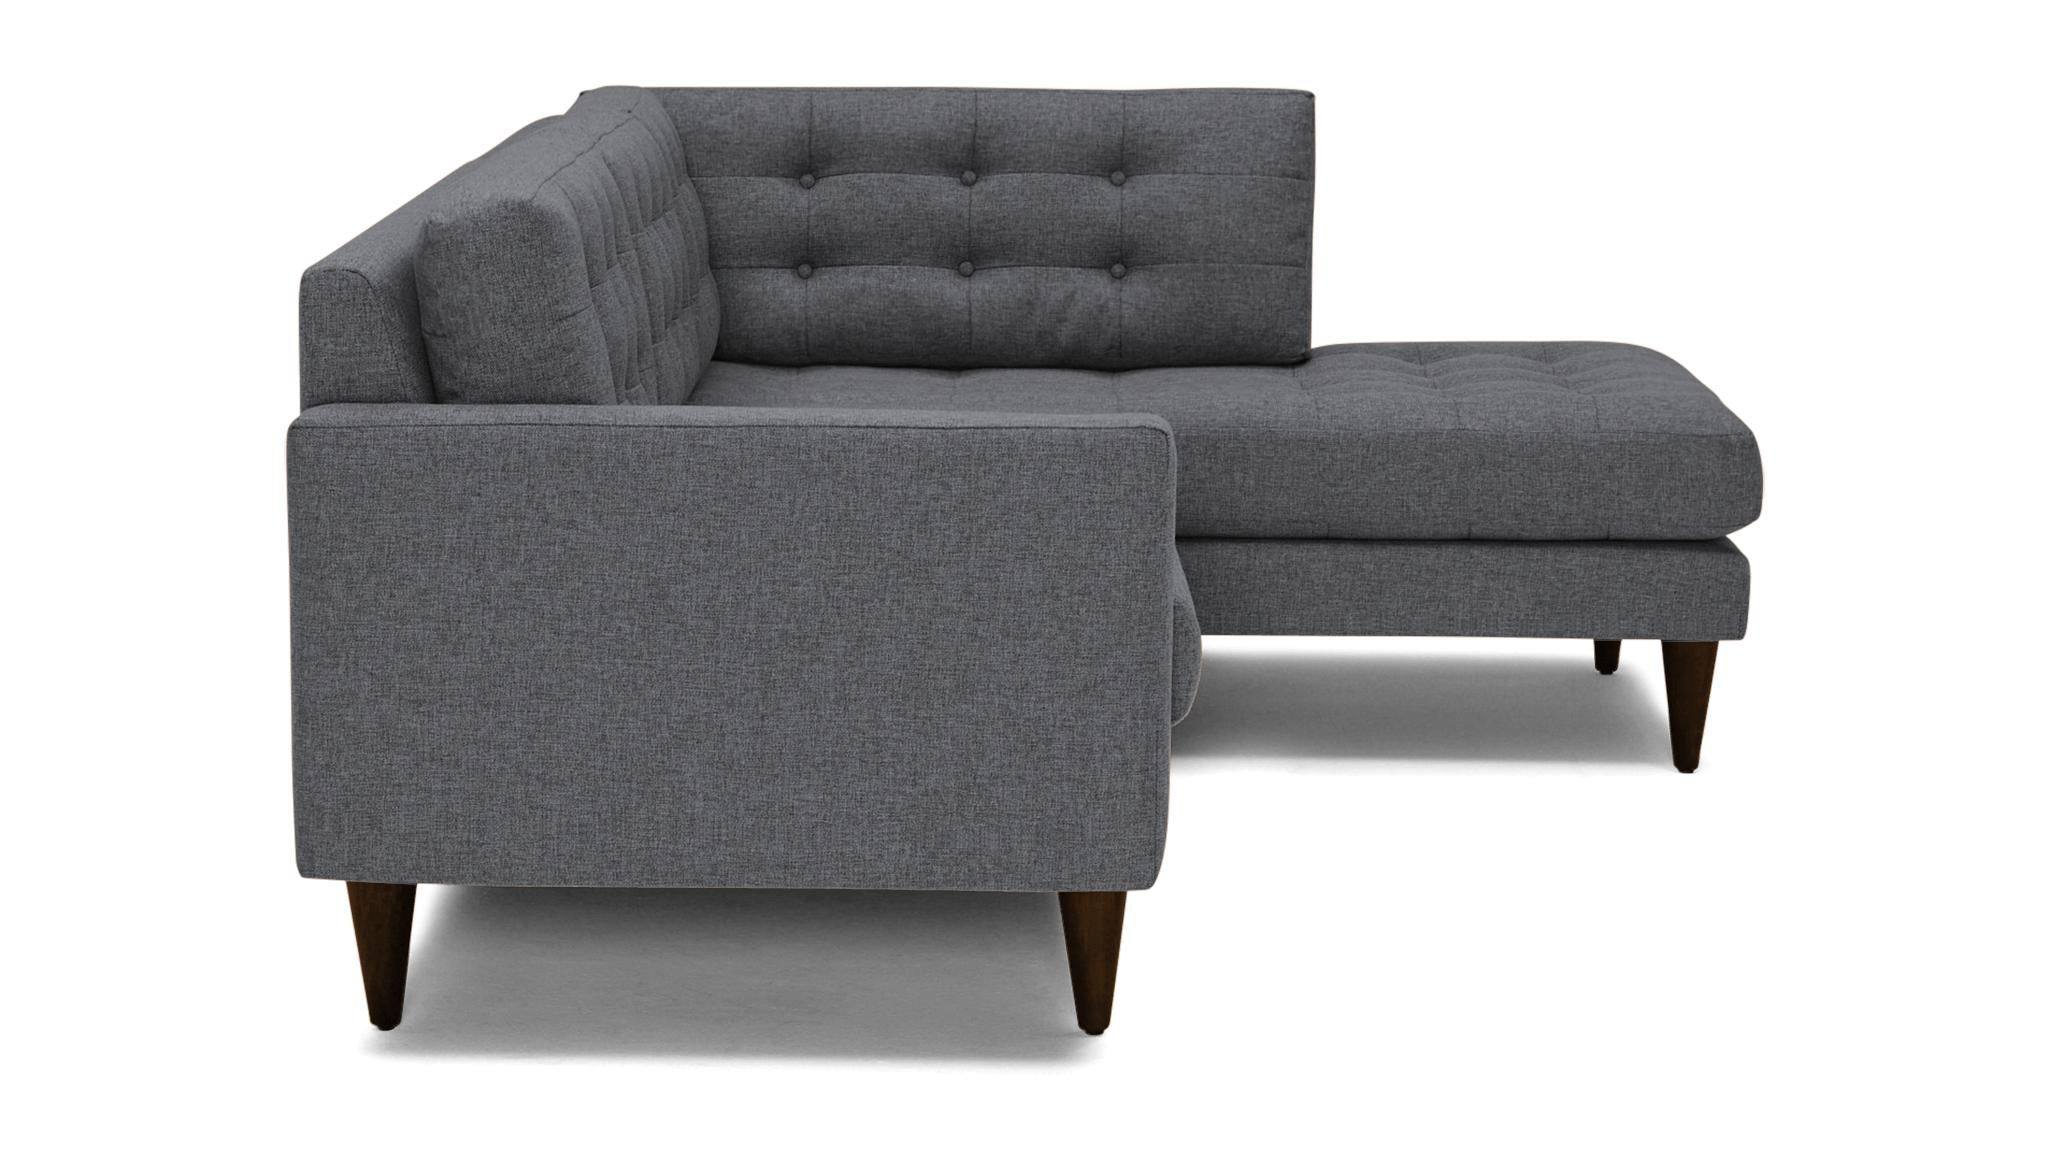 Gray Eliot Mid Century Modern Apartment Sectional with Bumper - Essence Ash - Mocha - Right  - Image 1